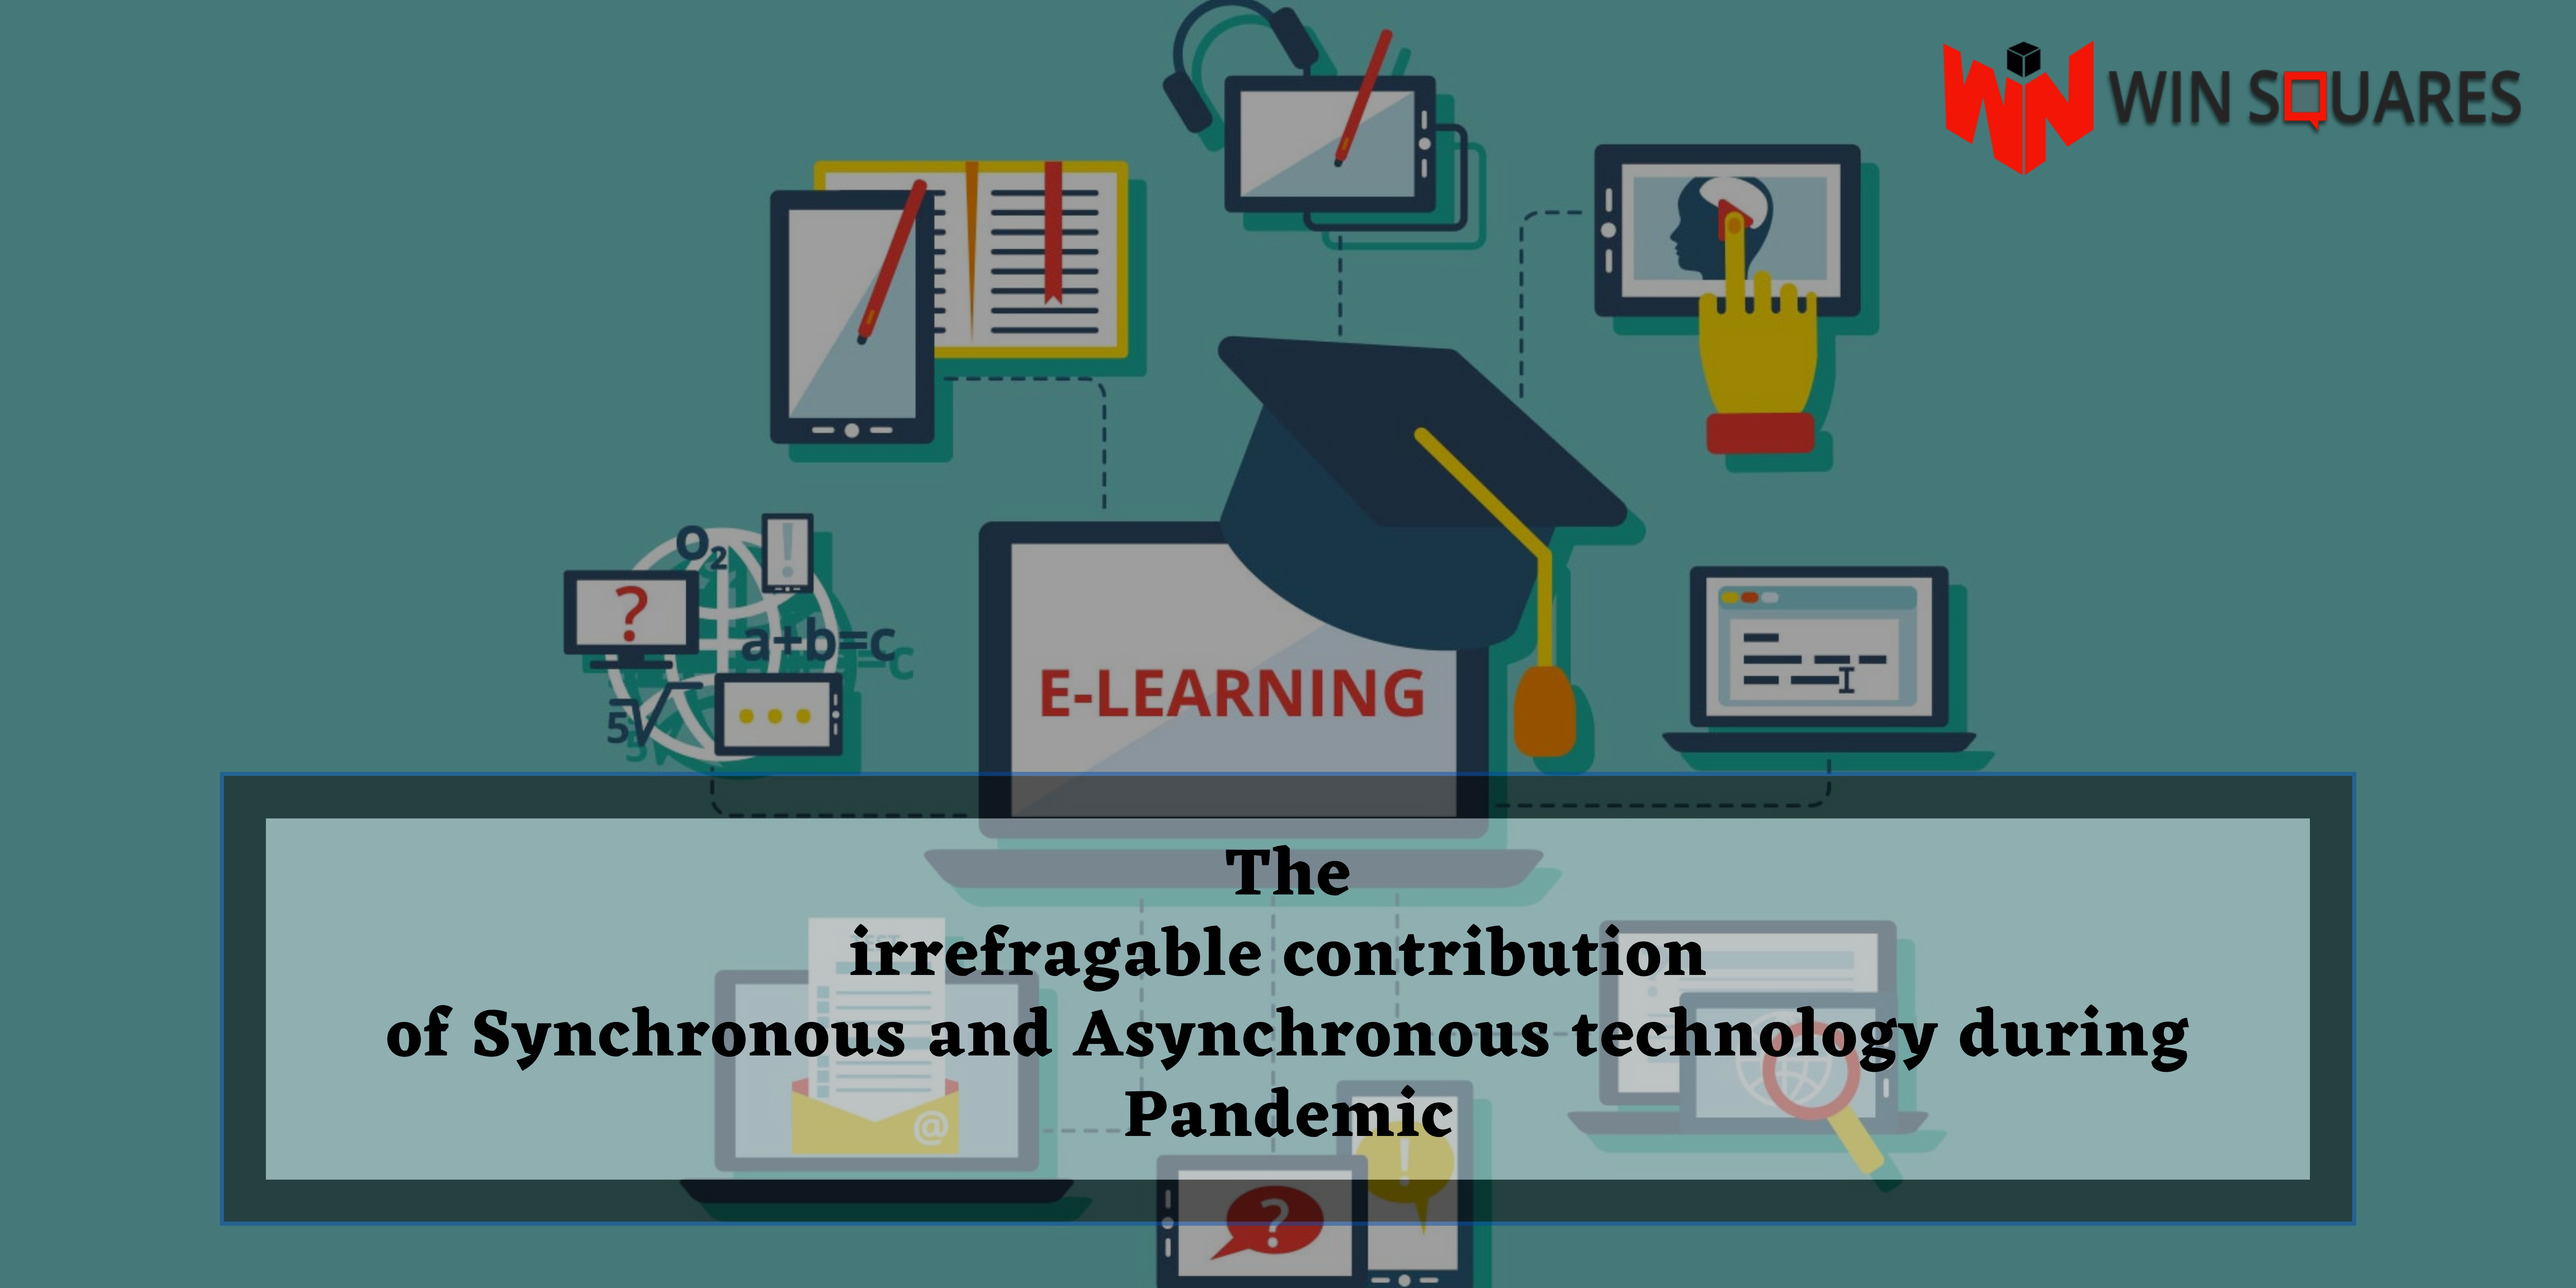 The irrefragable contribution of Synchronous and Asynchronous technology during Pandemic